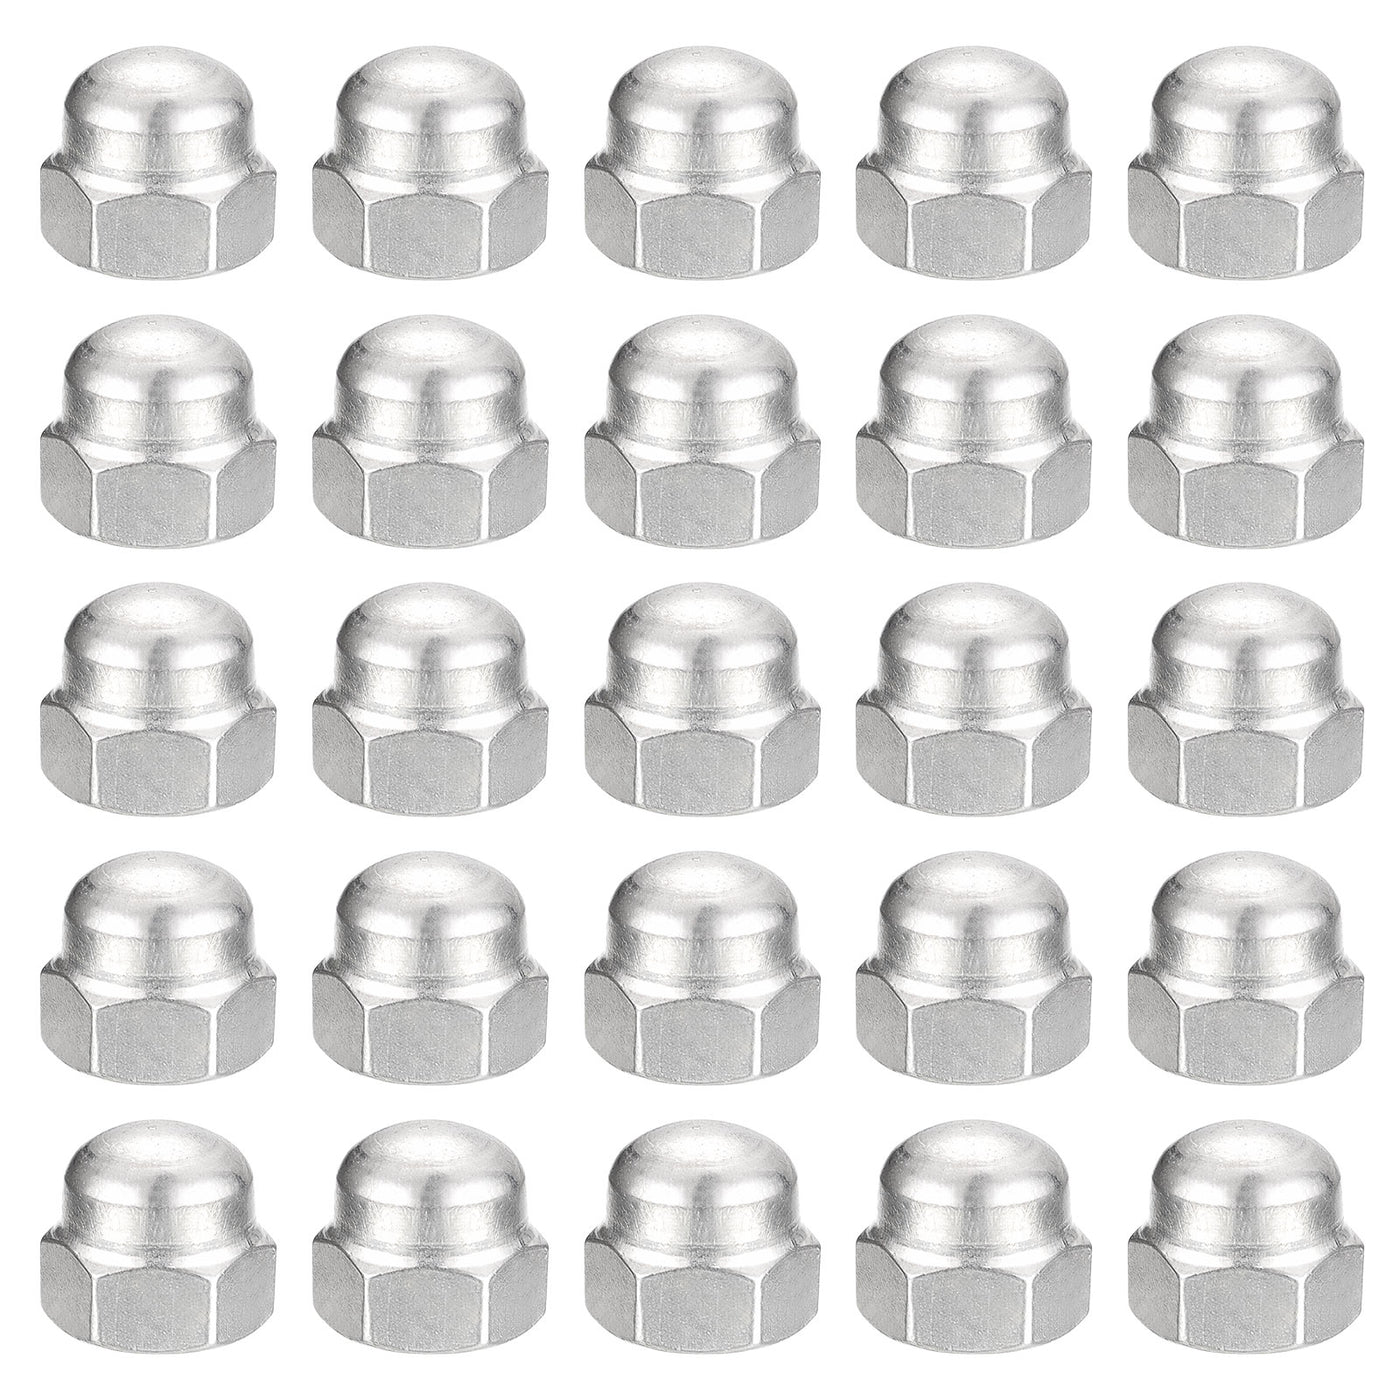 uxcell Uxcell 5/16-18 Acorn Cap Nuts,25pcs - 304 Stainless Steel Hardware Nuts, Acorn Hex Cap Dome Head Nuts for Fasteners (Silver)